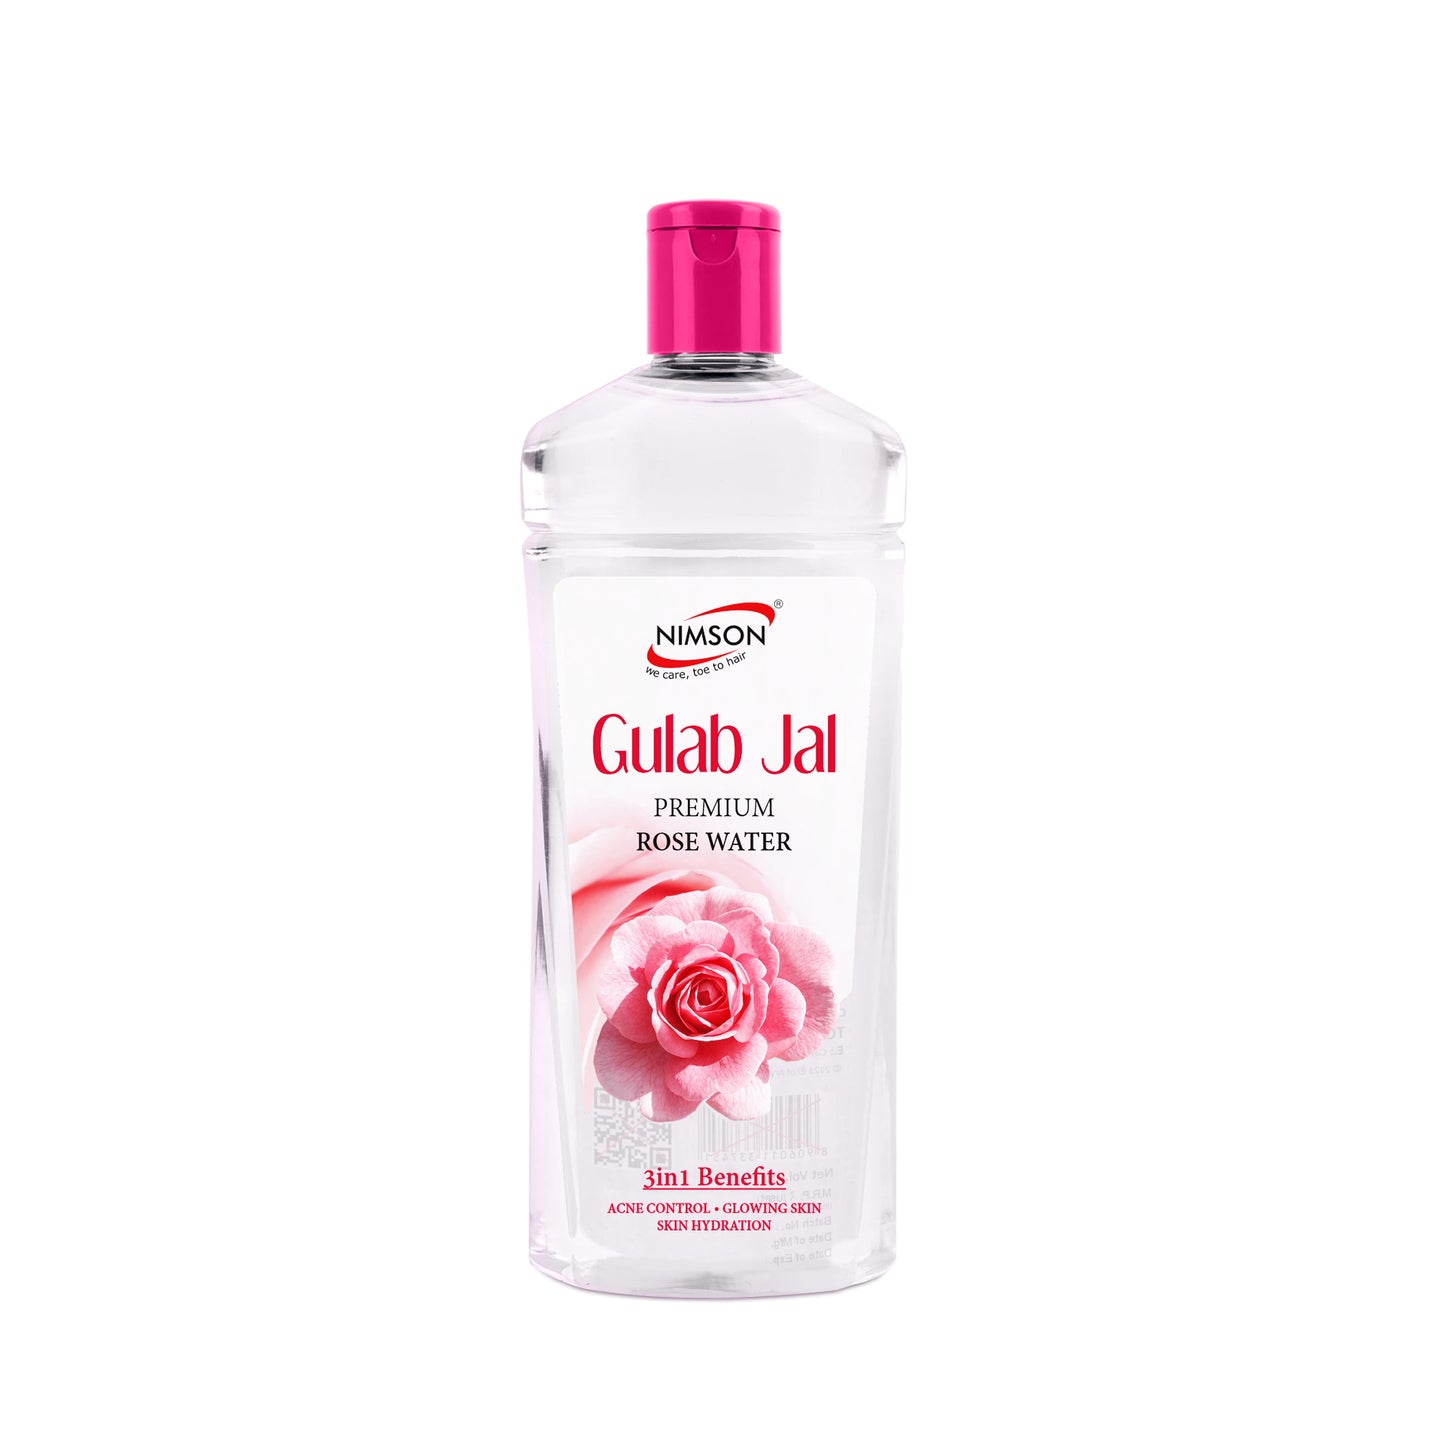 Gulab Jal Premium Rose Water For Acne Control +Glowing Skin +Skin Hydration